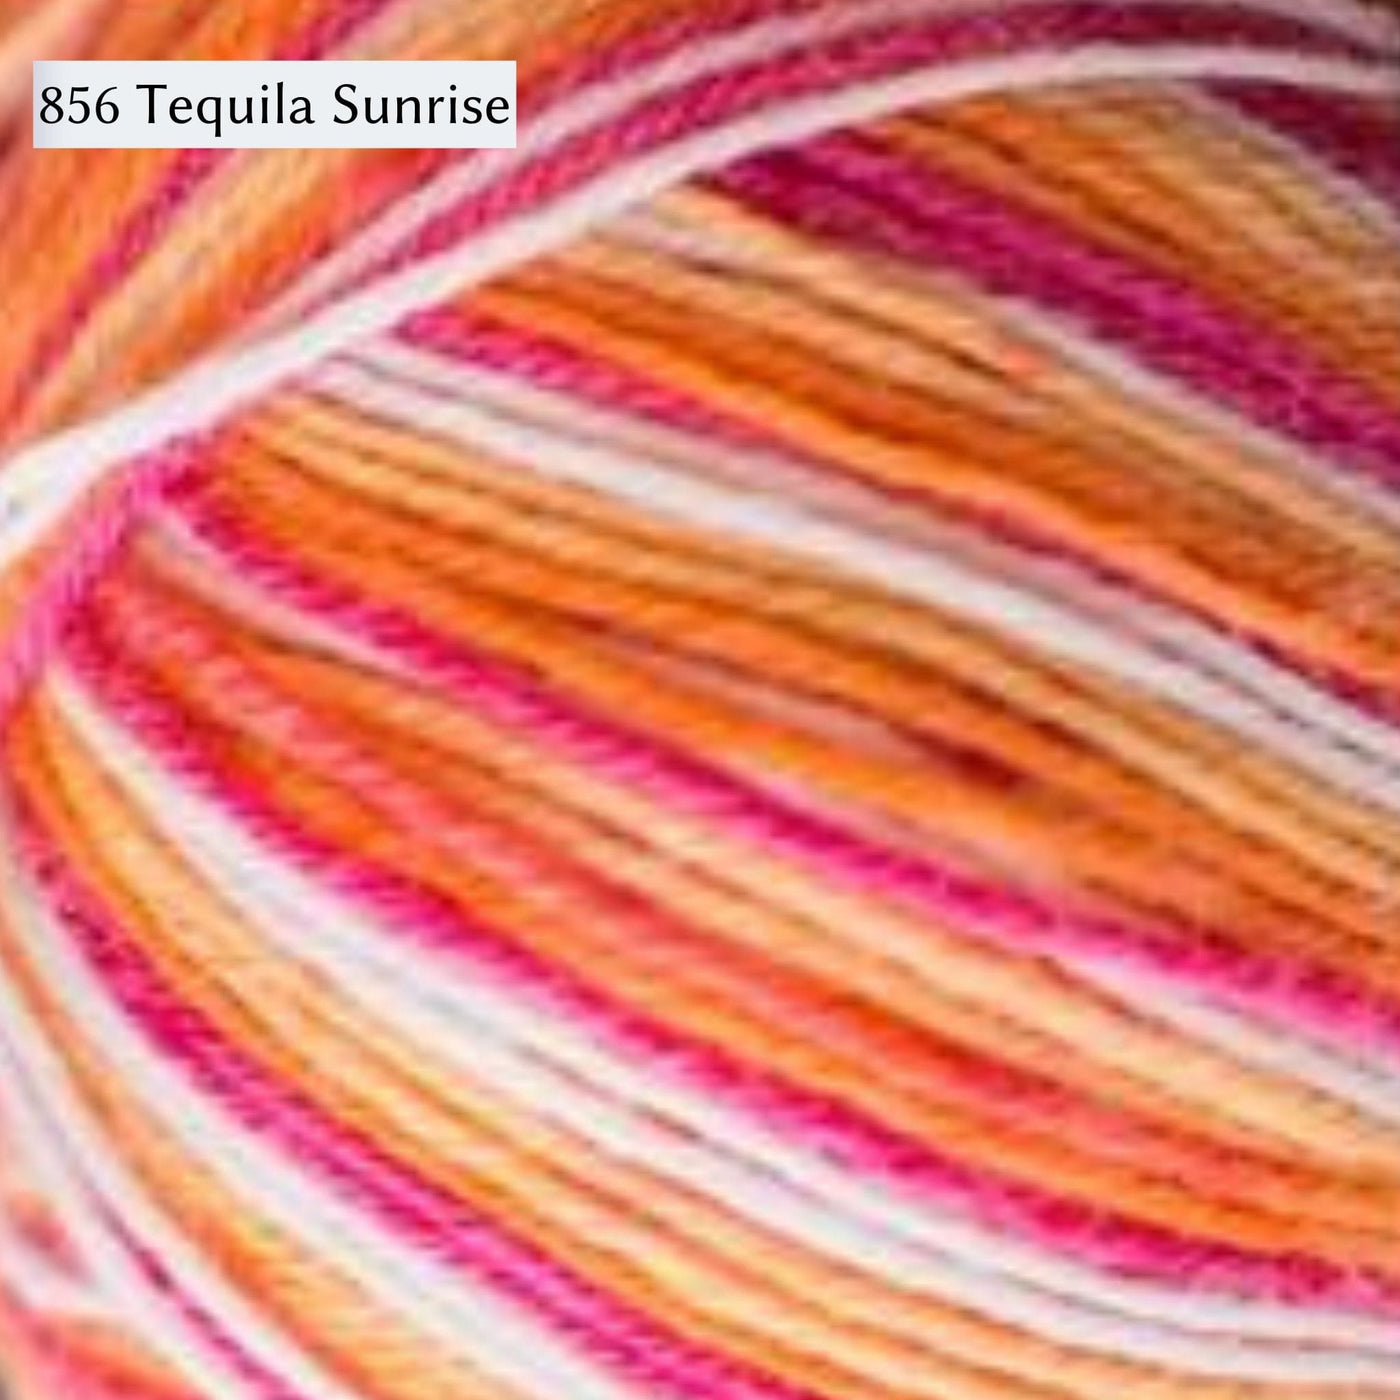 West Yorkshire Spinners Signature 4ply yarn, fingering weight, in color 856 Tequila Sunrise, a striping colorway with white, pink, creamsicle orange and deeper orange. 